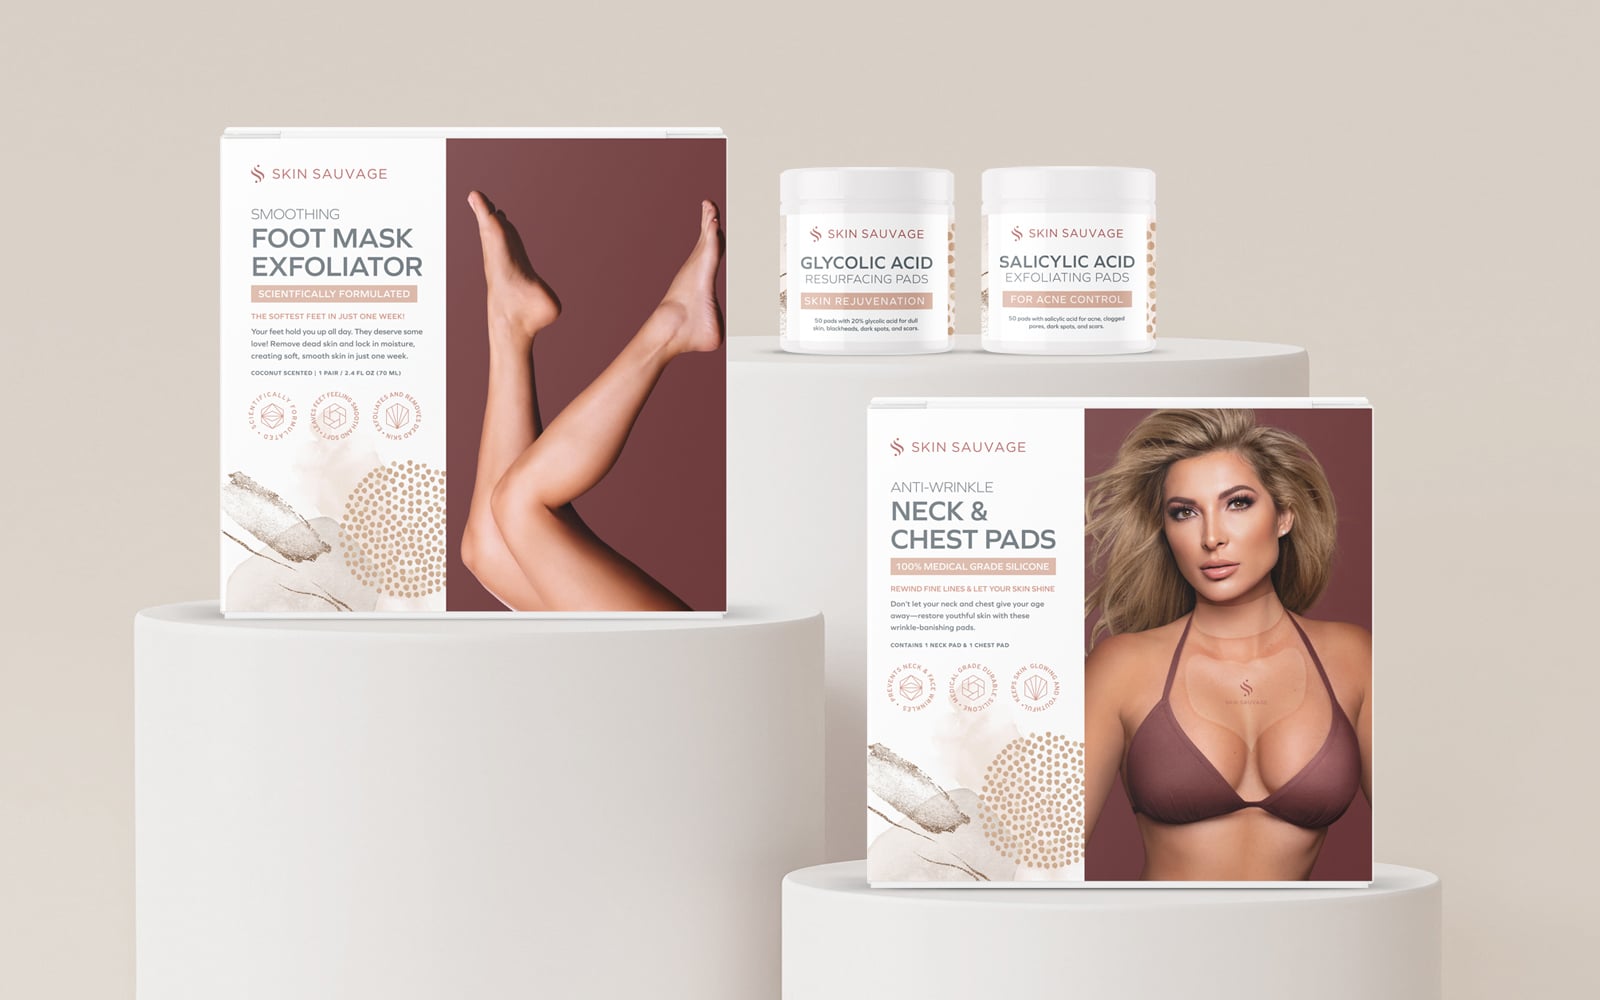 Final designs of Marina Dedivanovic’s new skincare product line of exfoliating face, chest, neck, and foot pads with newly designed logos, branding, and packaging